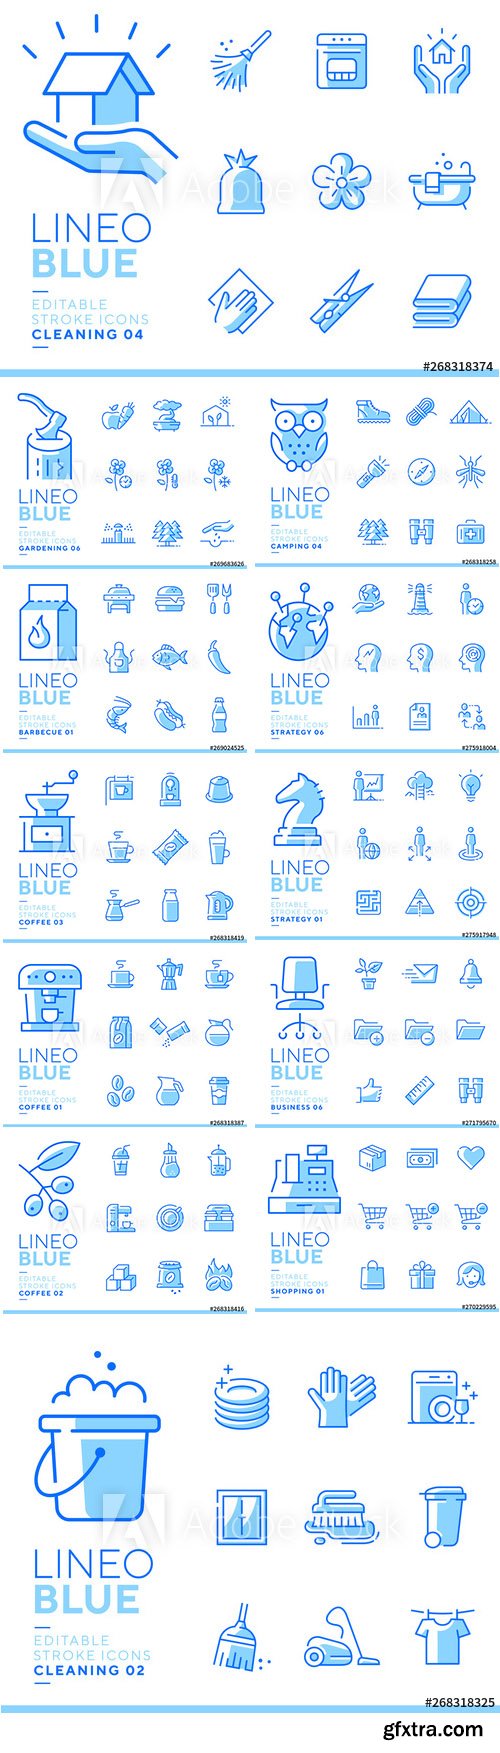 Lineo Blue - Line Icons Pack Vol 3